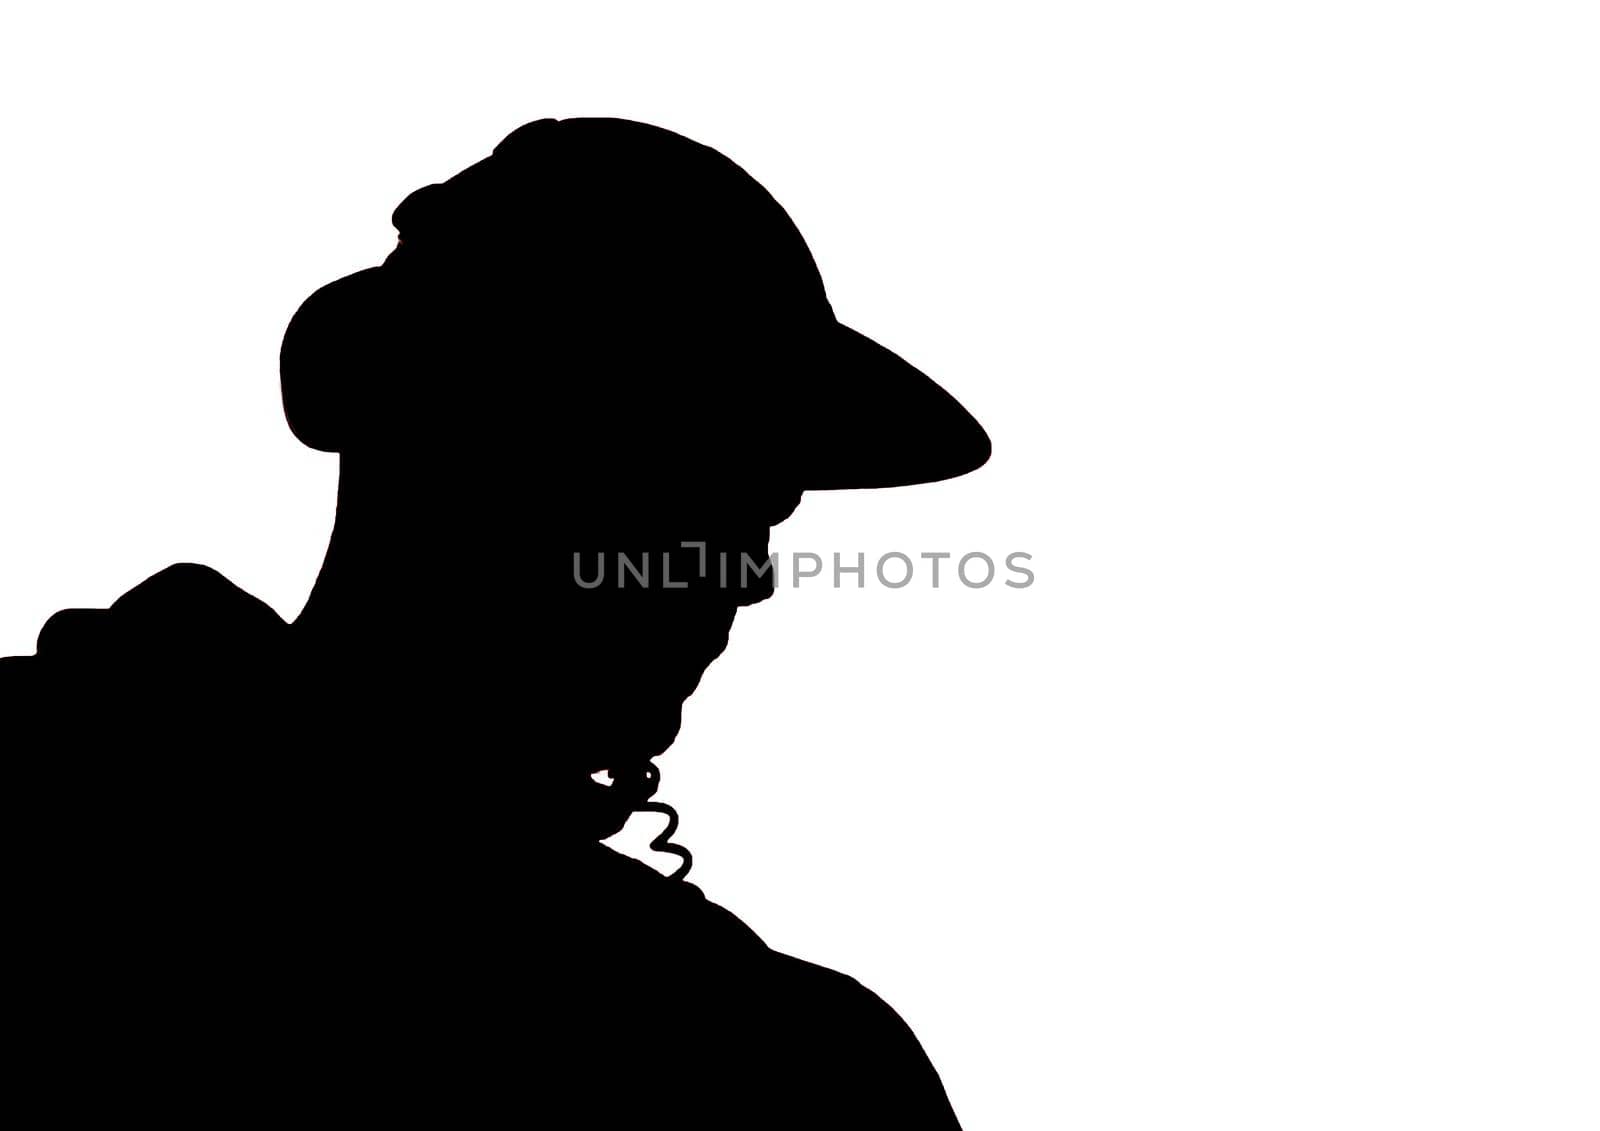 The black silhouette of a man in a cap and DJ headphones on a white background isolated.